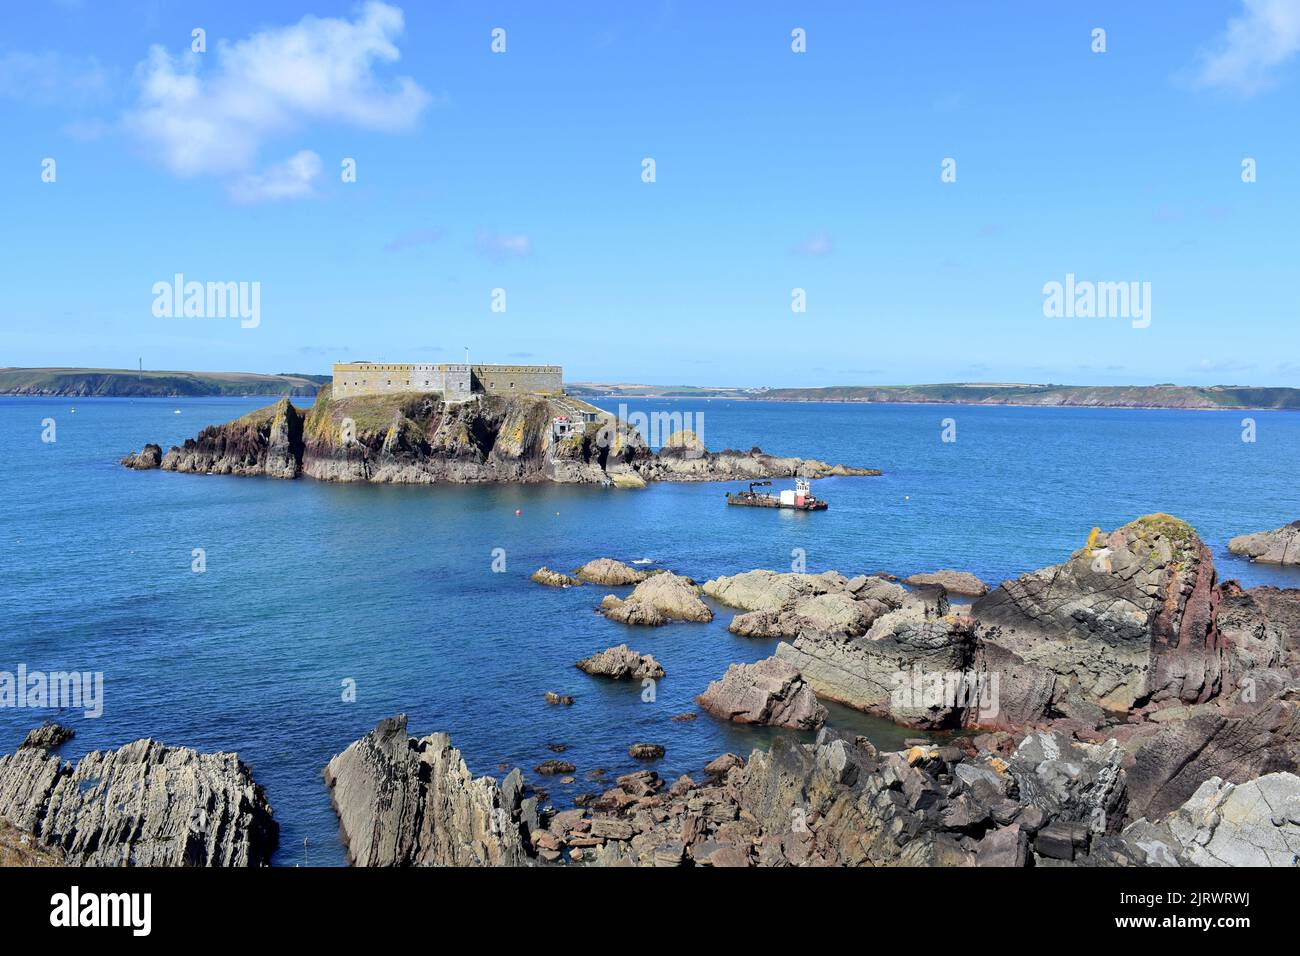 Thorne island and view across Milford Haven waterway, Angle, Pembrokeshire, Wales Stock Photo